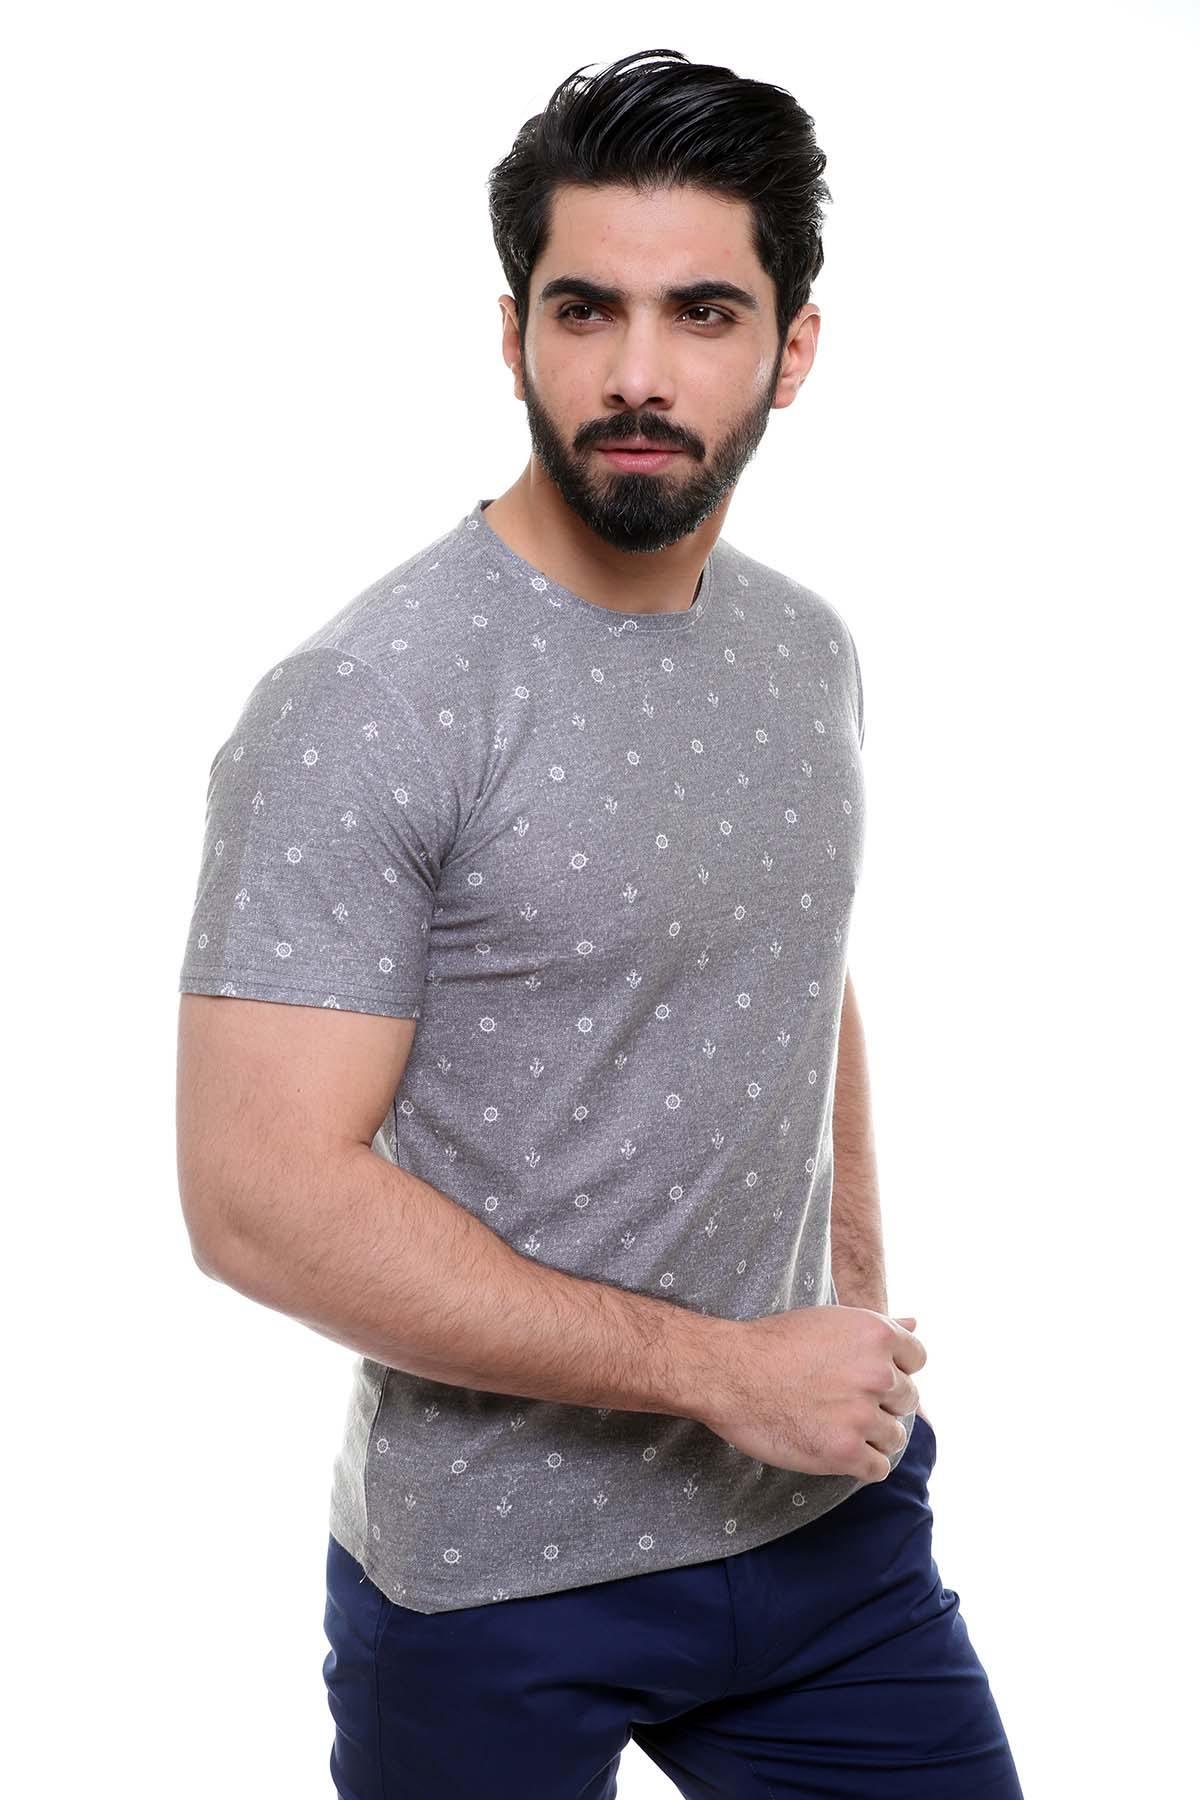 T SHIRT ROUND NECK GREY at Charcoal Clothing